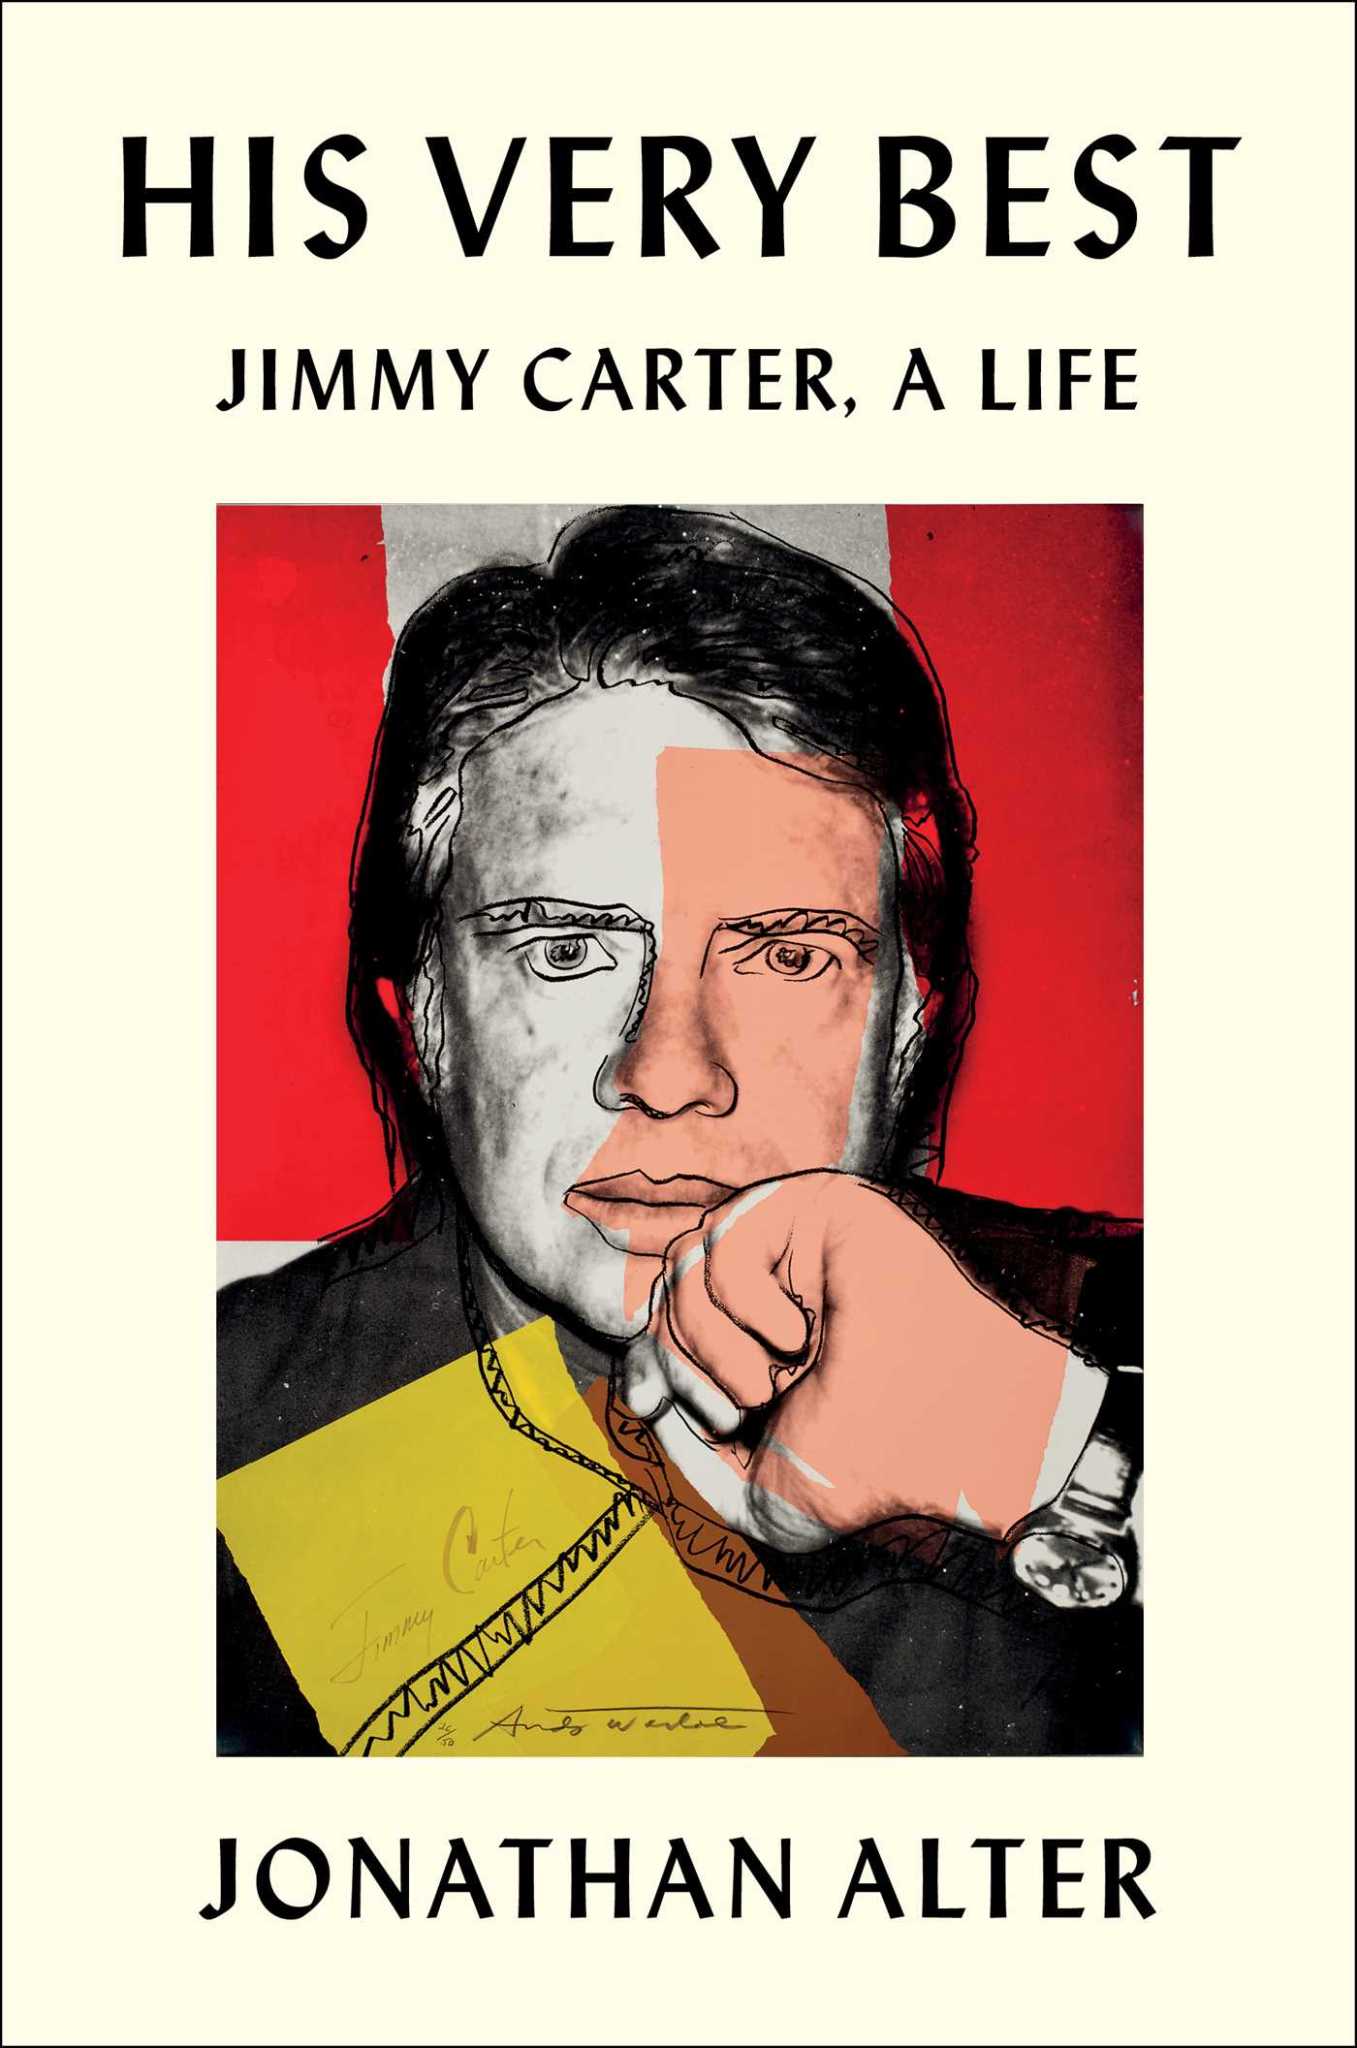 His Very Best, Jimmy Carter, A Life by Jonathan Alter